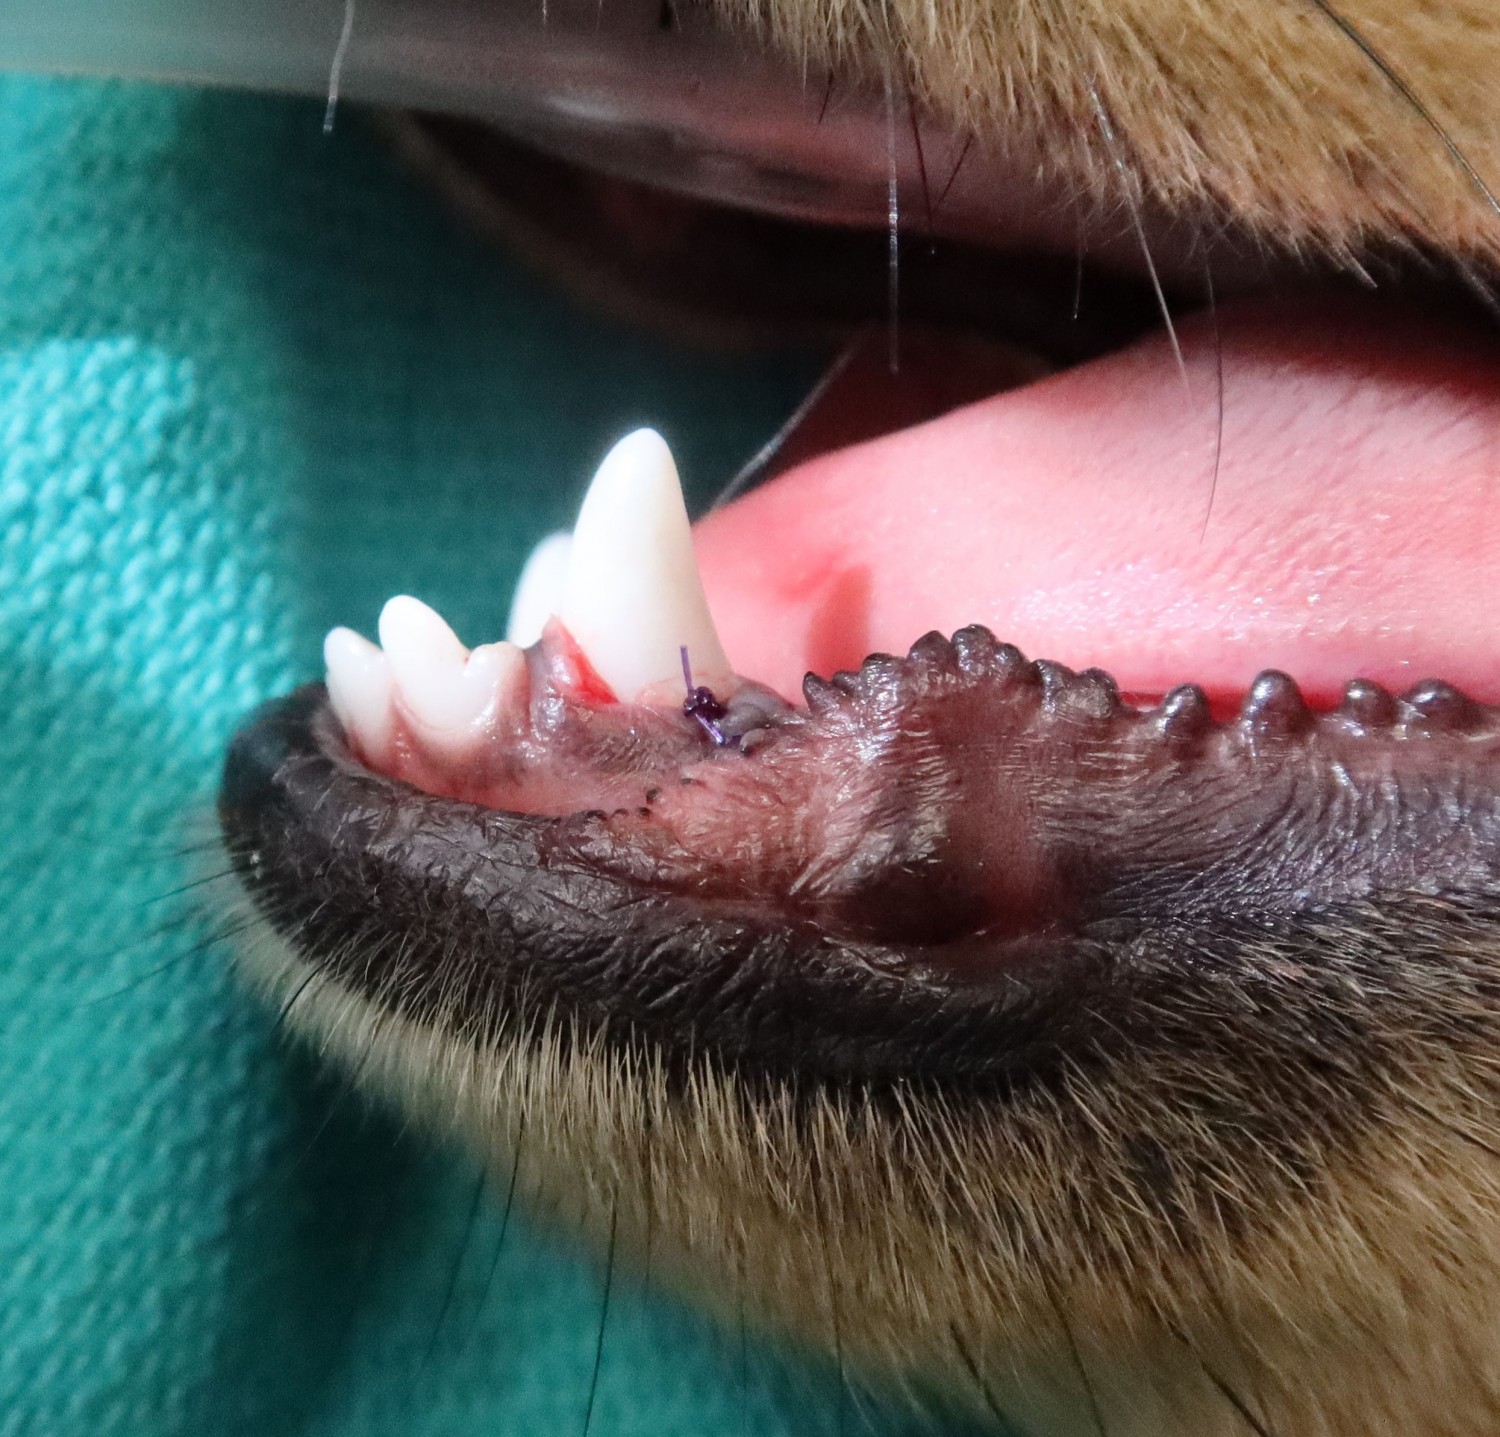 After removal of retained deciduous teeth